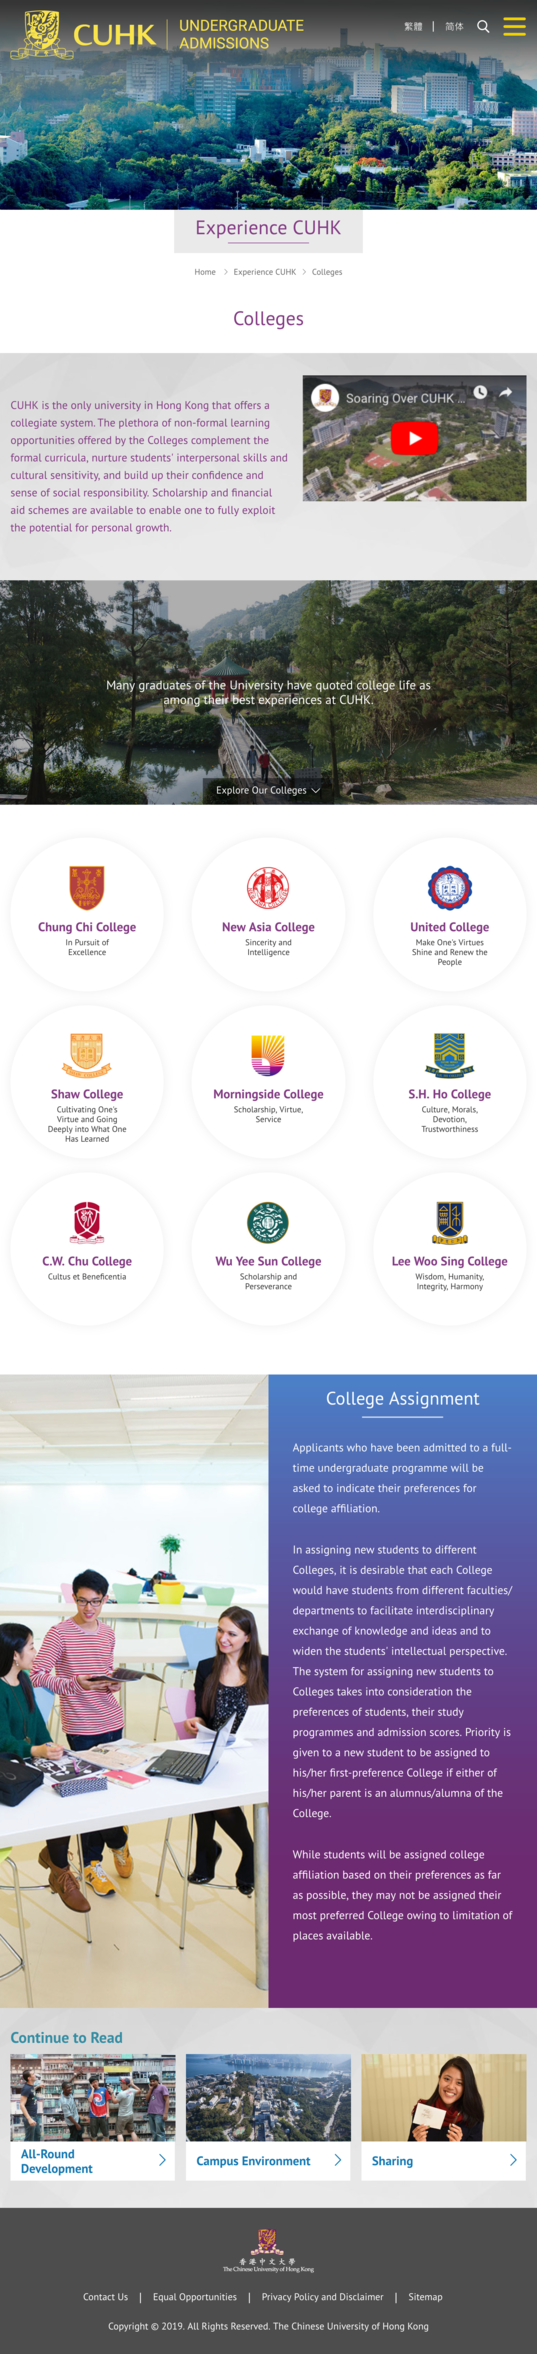 Tablet CUHK Admission Experience CUHK